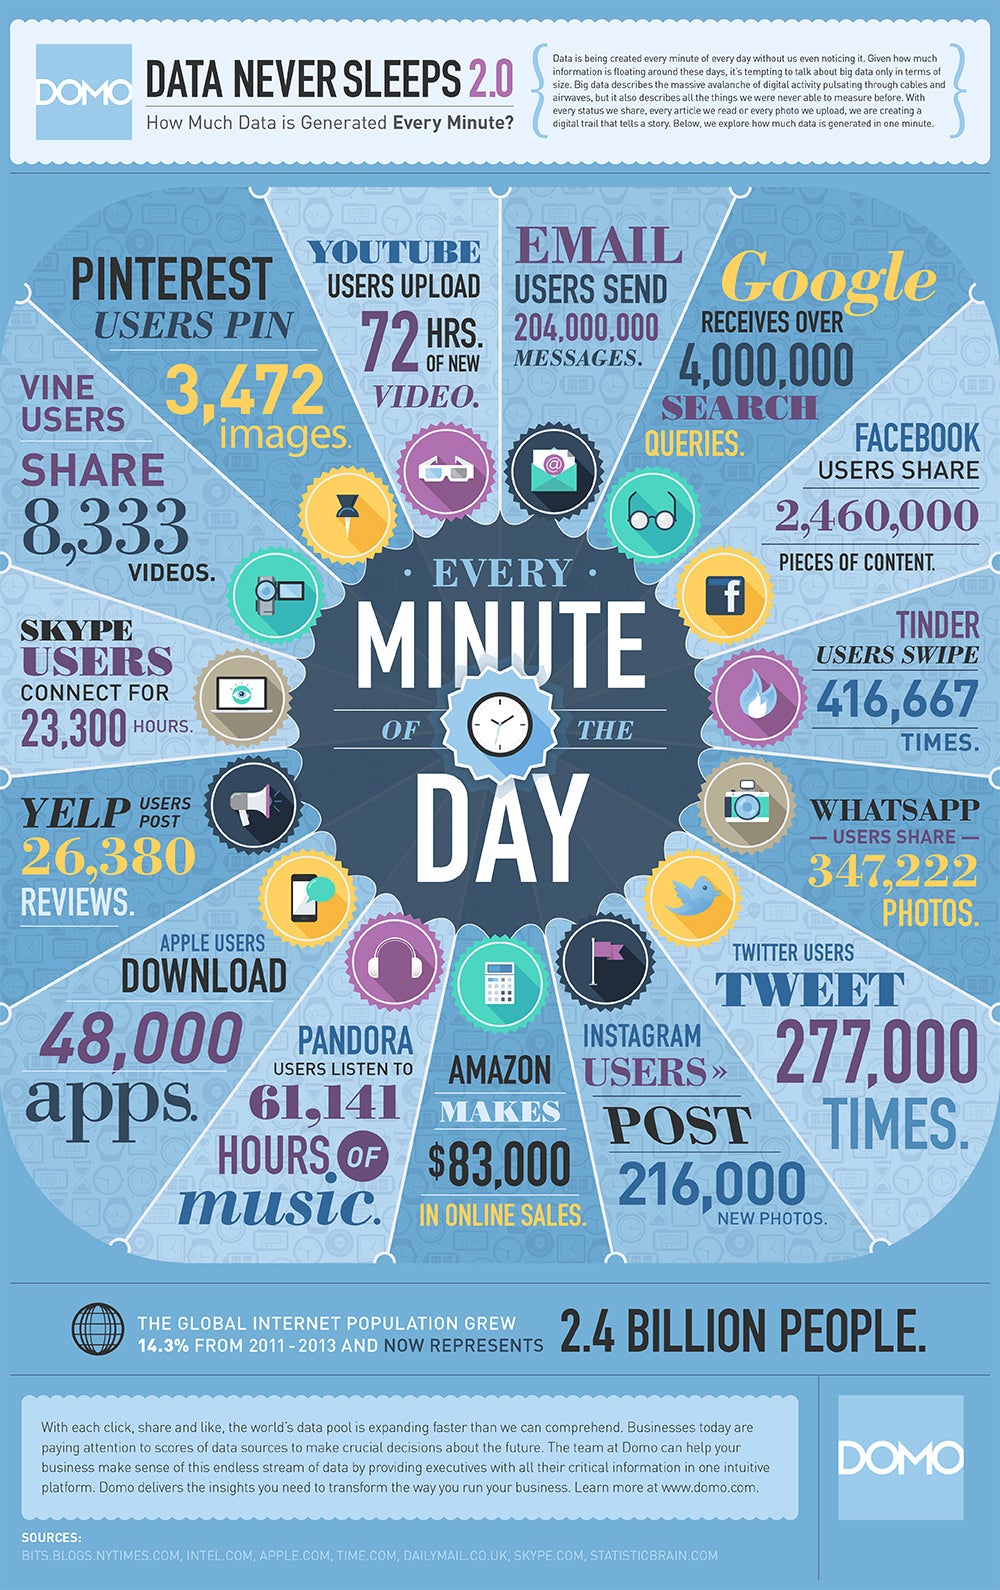 How Big Data Helps Us Keep Pace (Infographic)